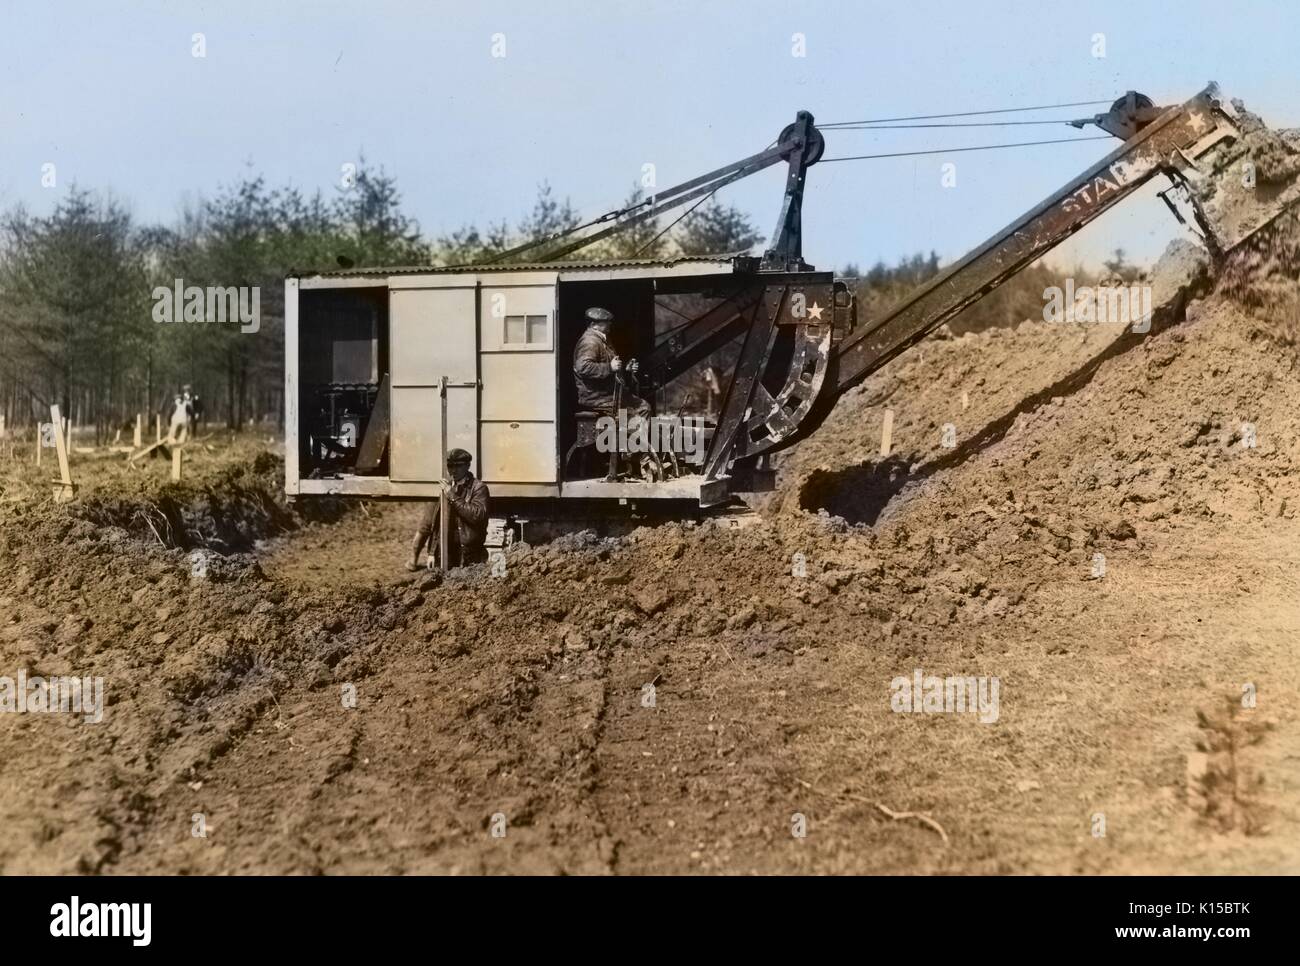 Mechanical digger working on cellar foundation at a Farm Security Administration housing unit at the Berwyn project, Greenbelt, Maryland, 1936. From the New York Public Library. Note: Image has been digitally colorized using a modern process. Colors may not be period-accurate. Stock Photo